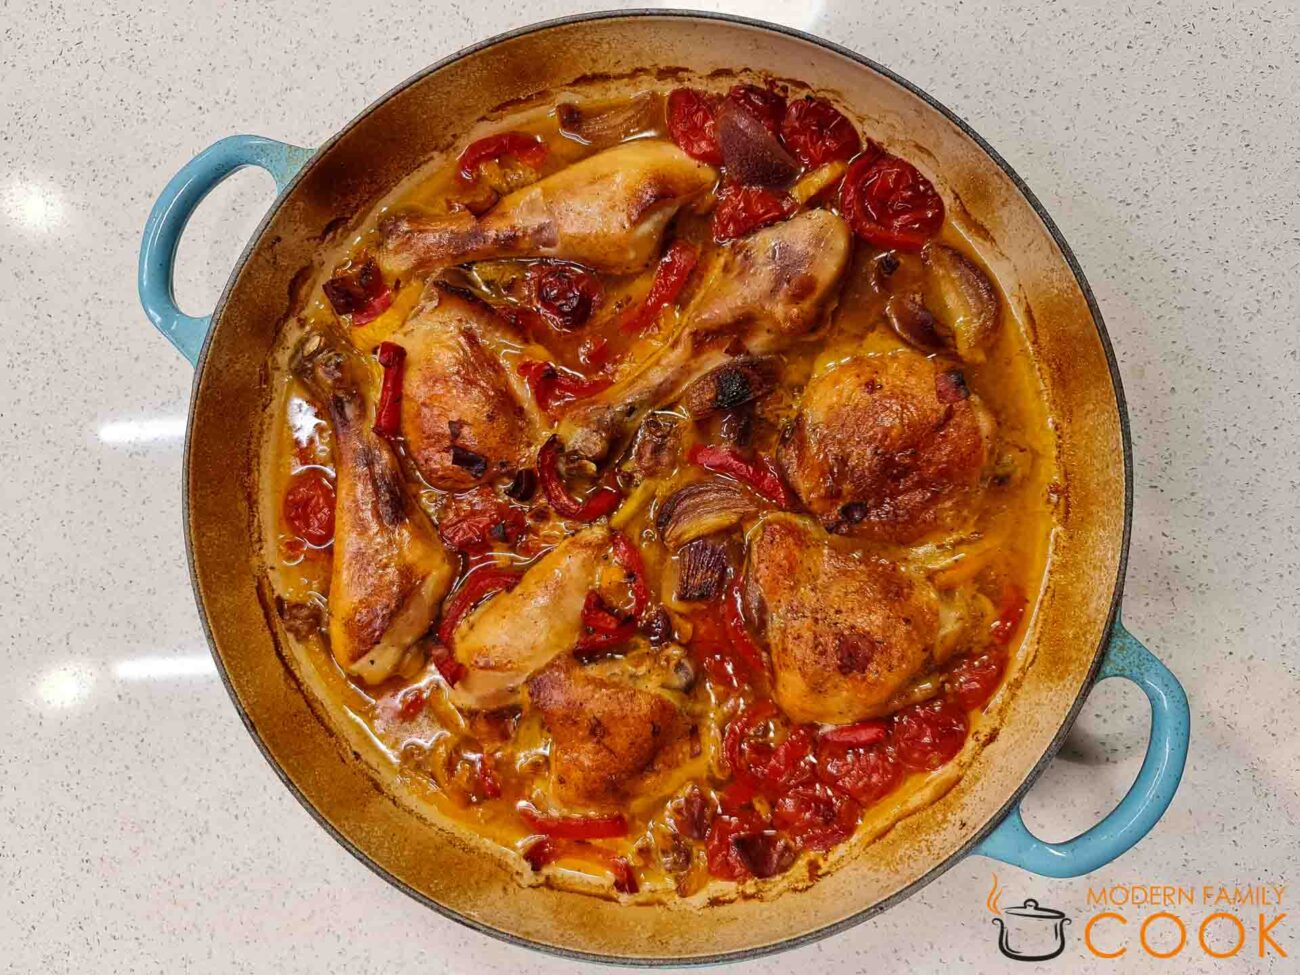 Chicken with Prosciutto and peppers in the oven